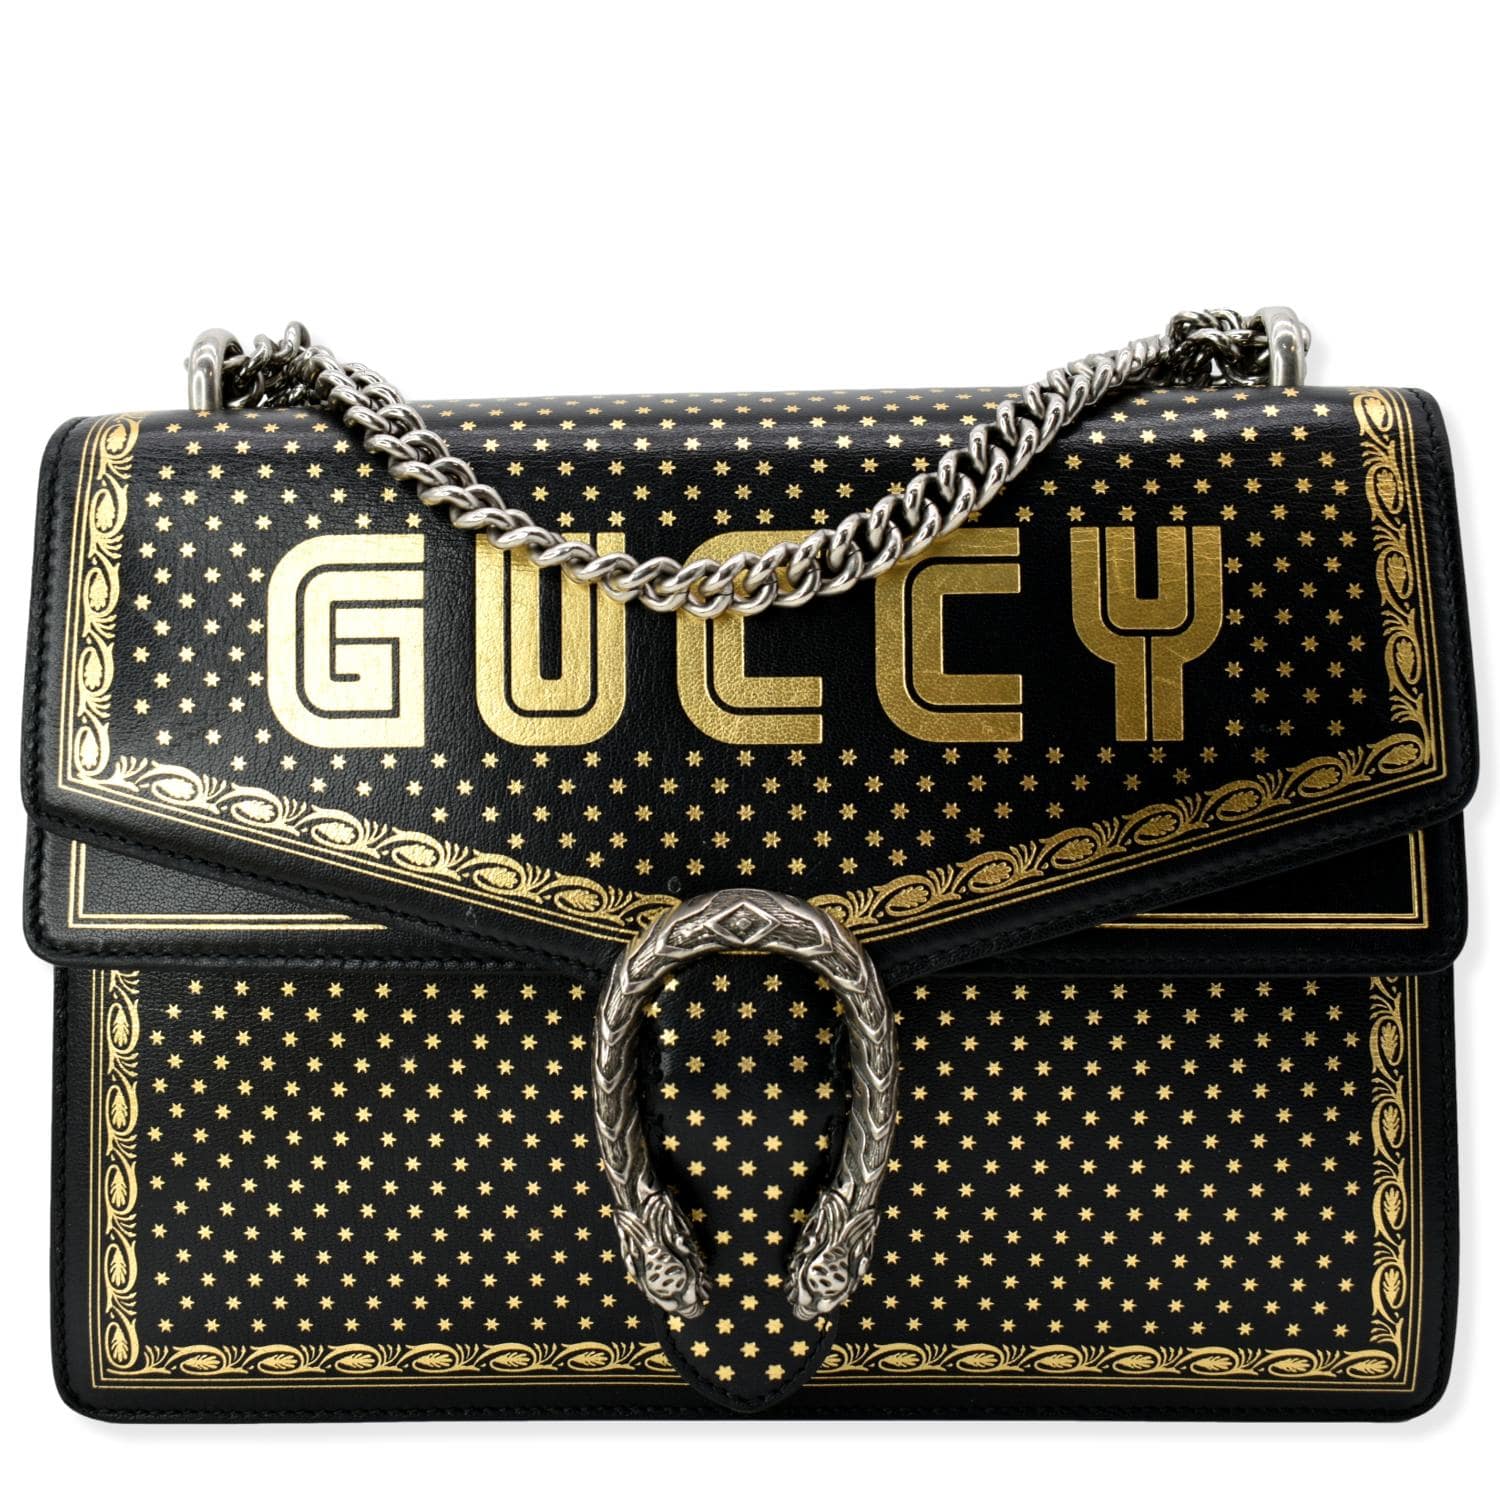 Gucci White Calfskin Leather Star Printed Star Printed GUCCY